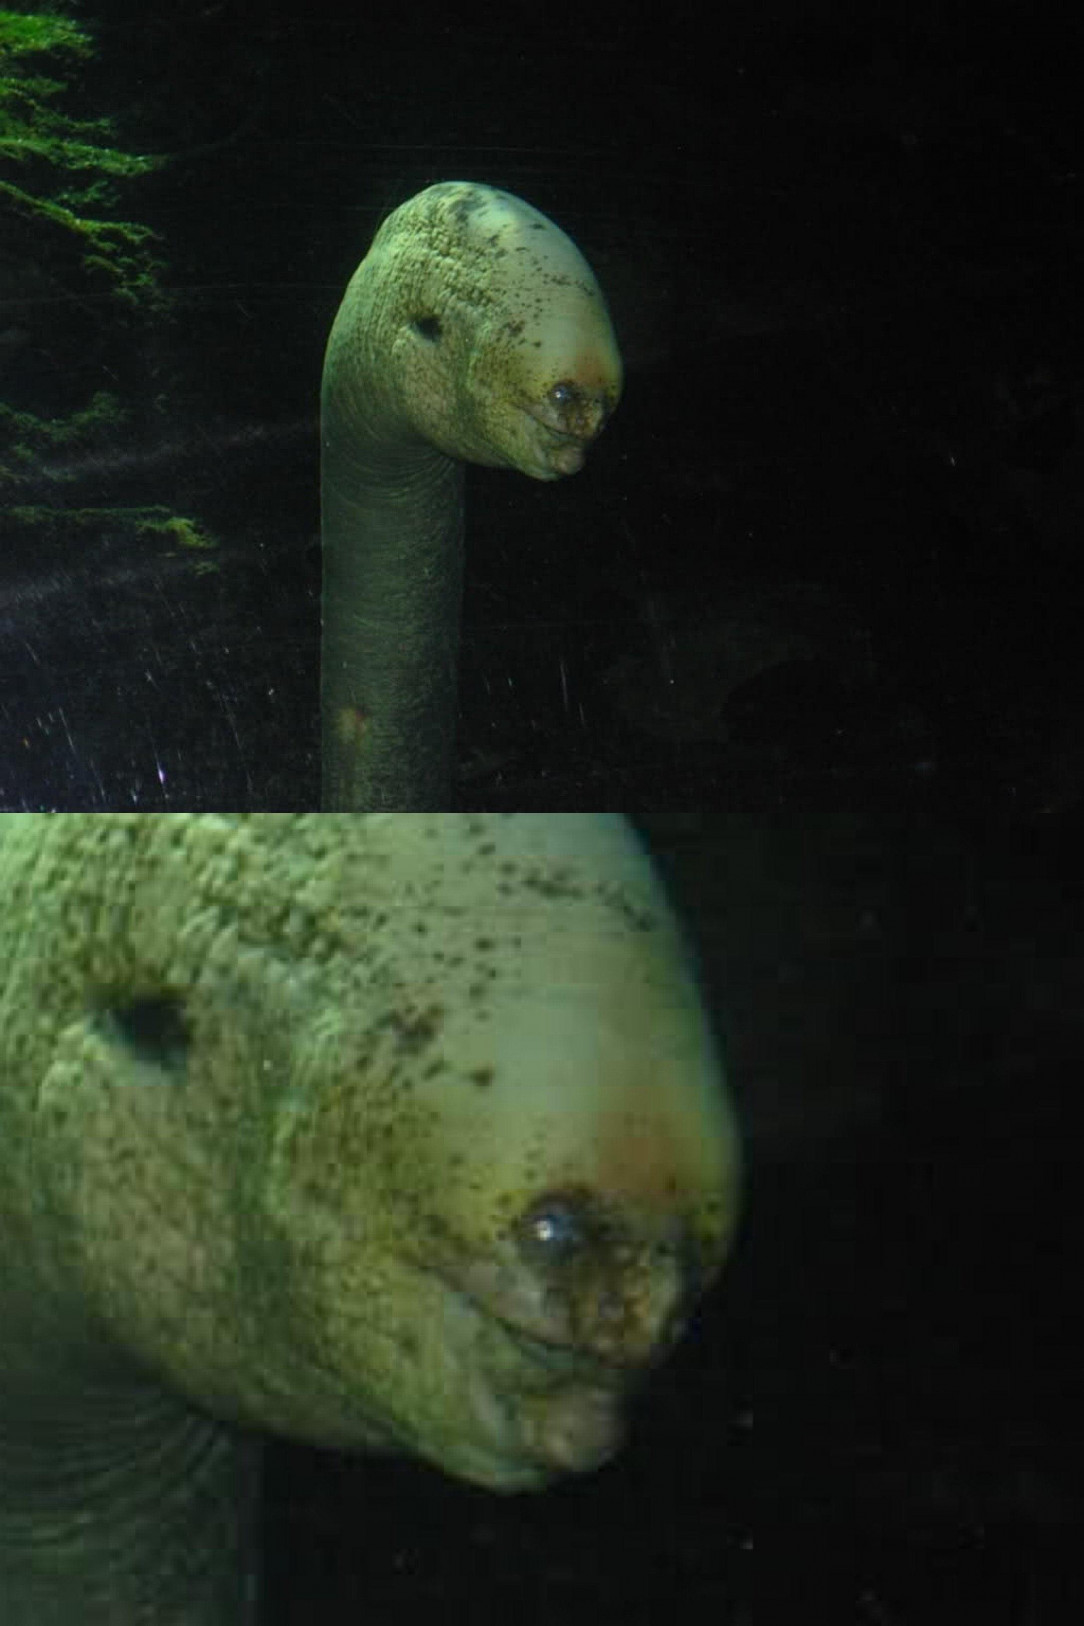 A moray eel with a disfigured face resides in an aquarium. That or this creature is a Lovecraftian God